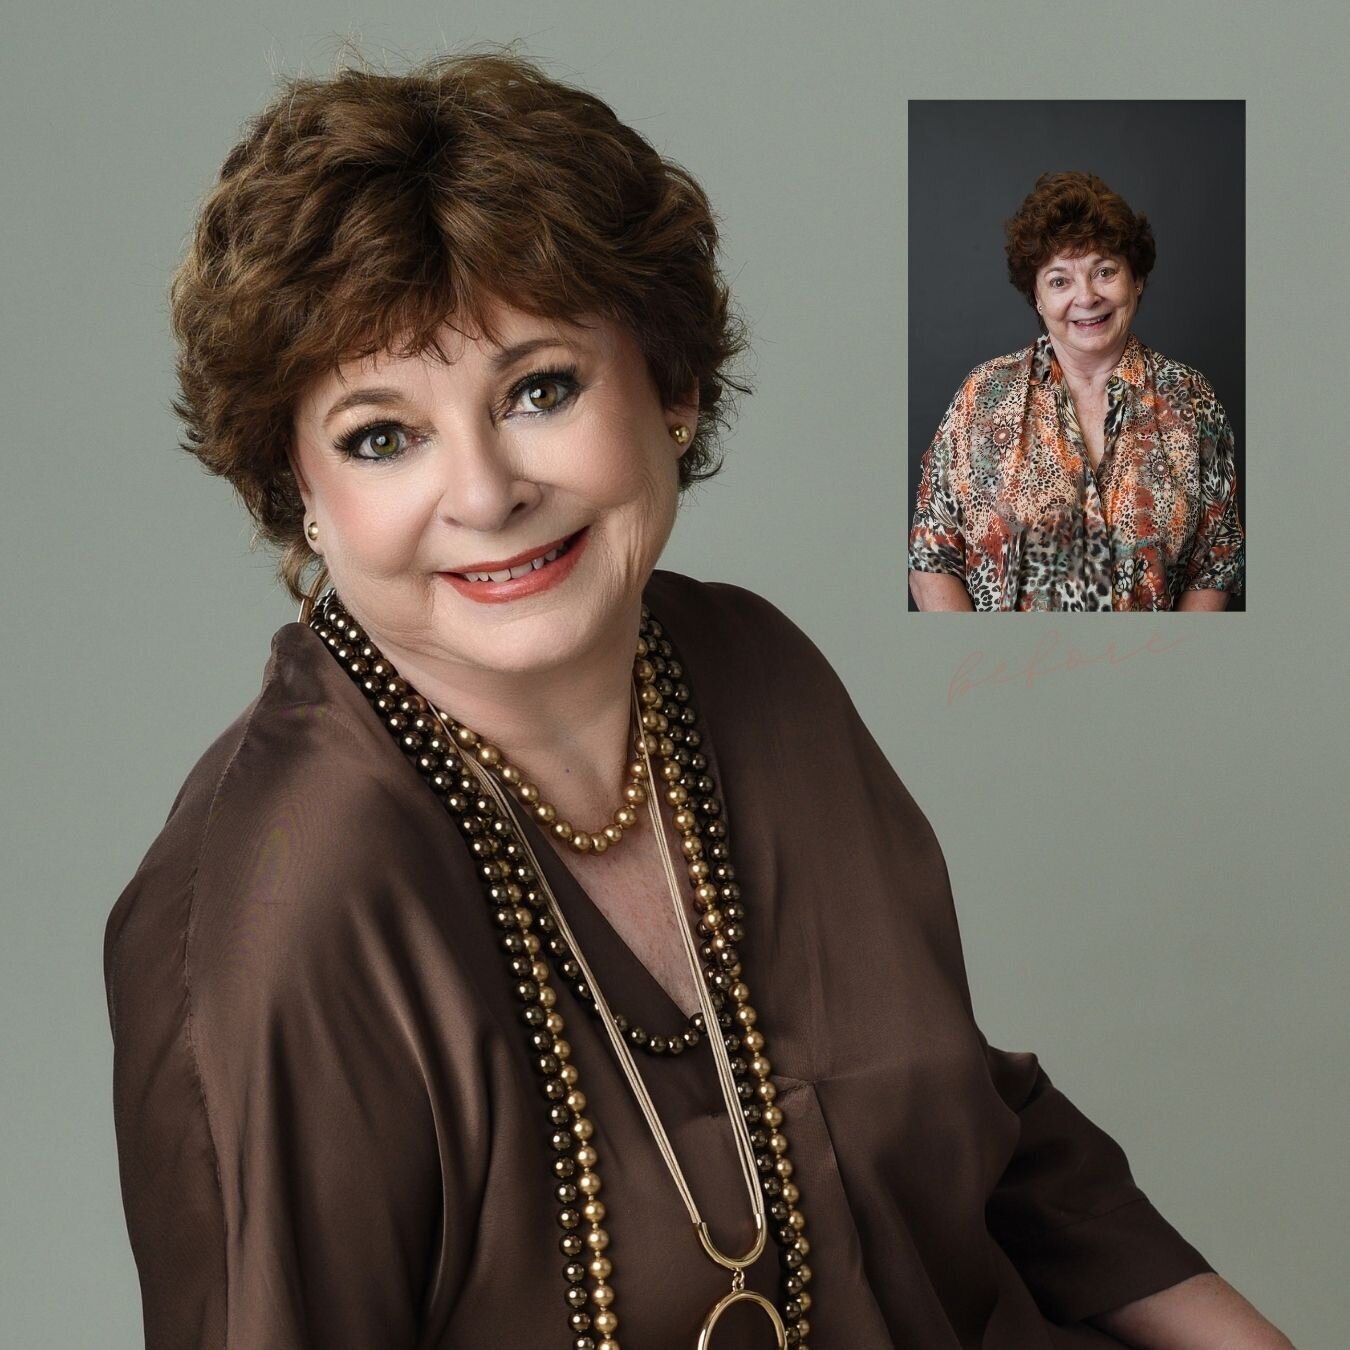 Mature woman with short curly hair wearing a silky brown dress and lots of long necklaces